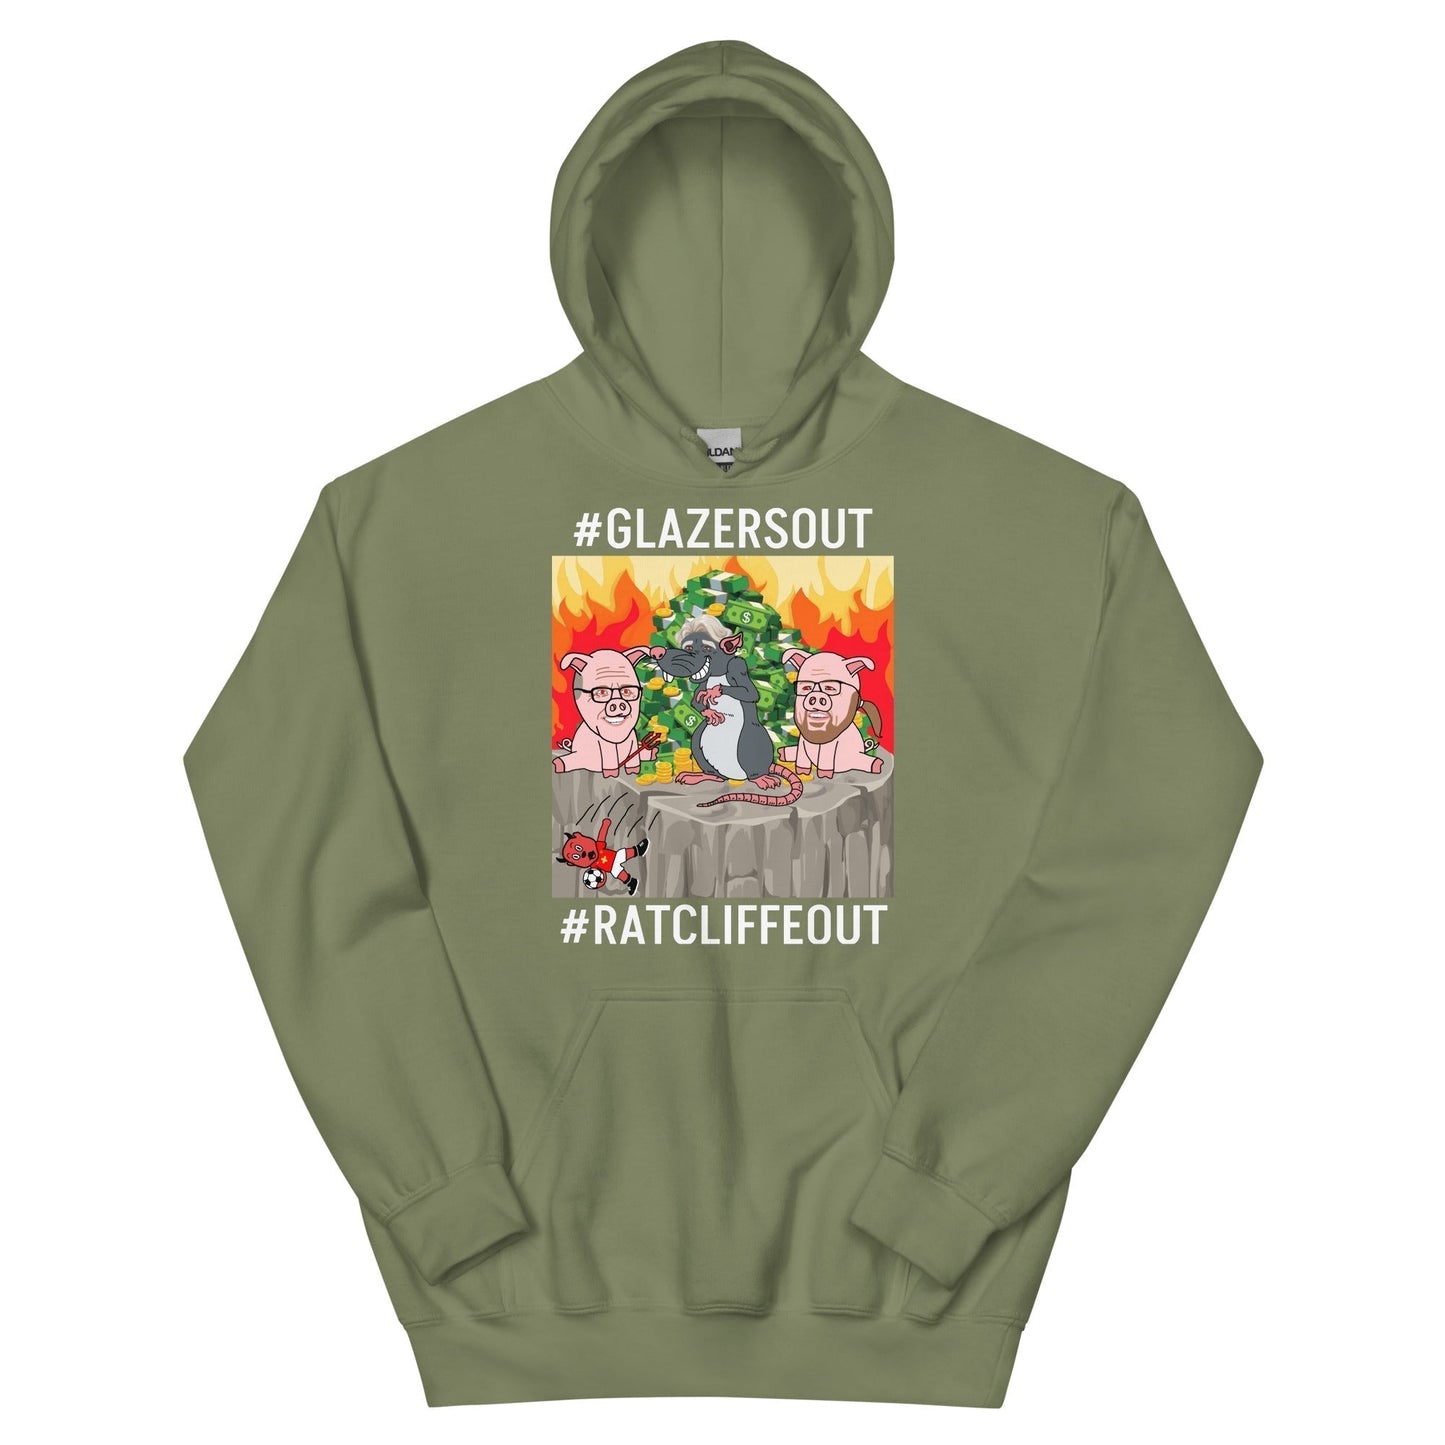 Manchester United Ratcliffe Out, Glazers Out Unisex Hoodie, White Letters, #GlazersOut #RatcliffeOut Next Cult Brand Football, GlazersOut, Manchester United, RatcliffeOut